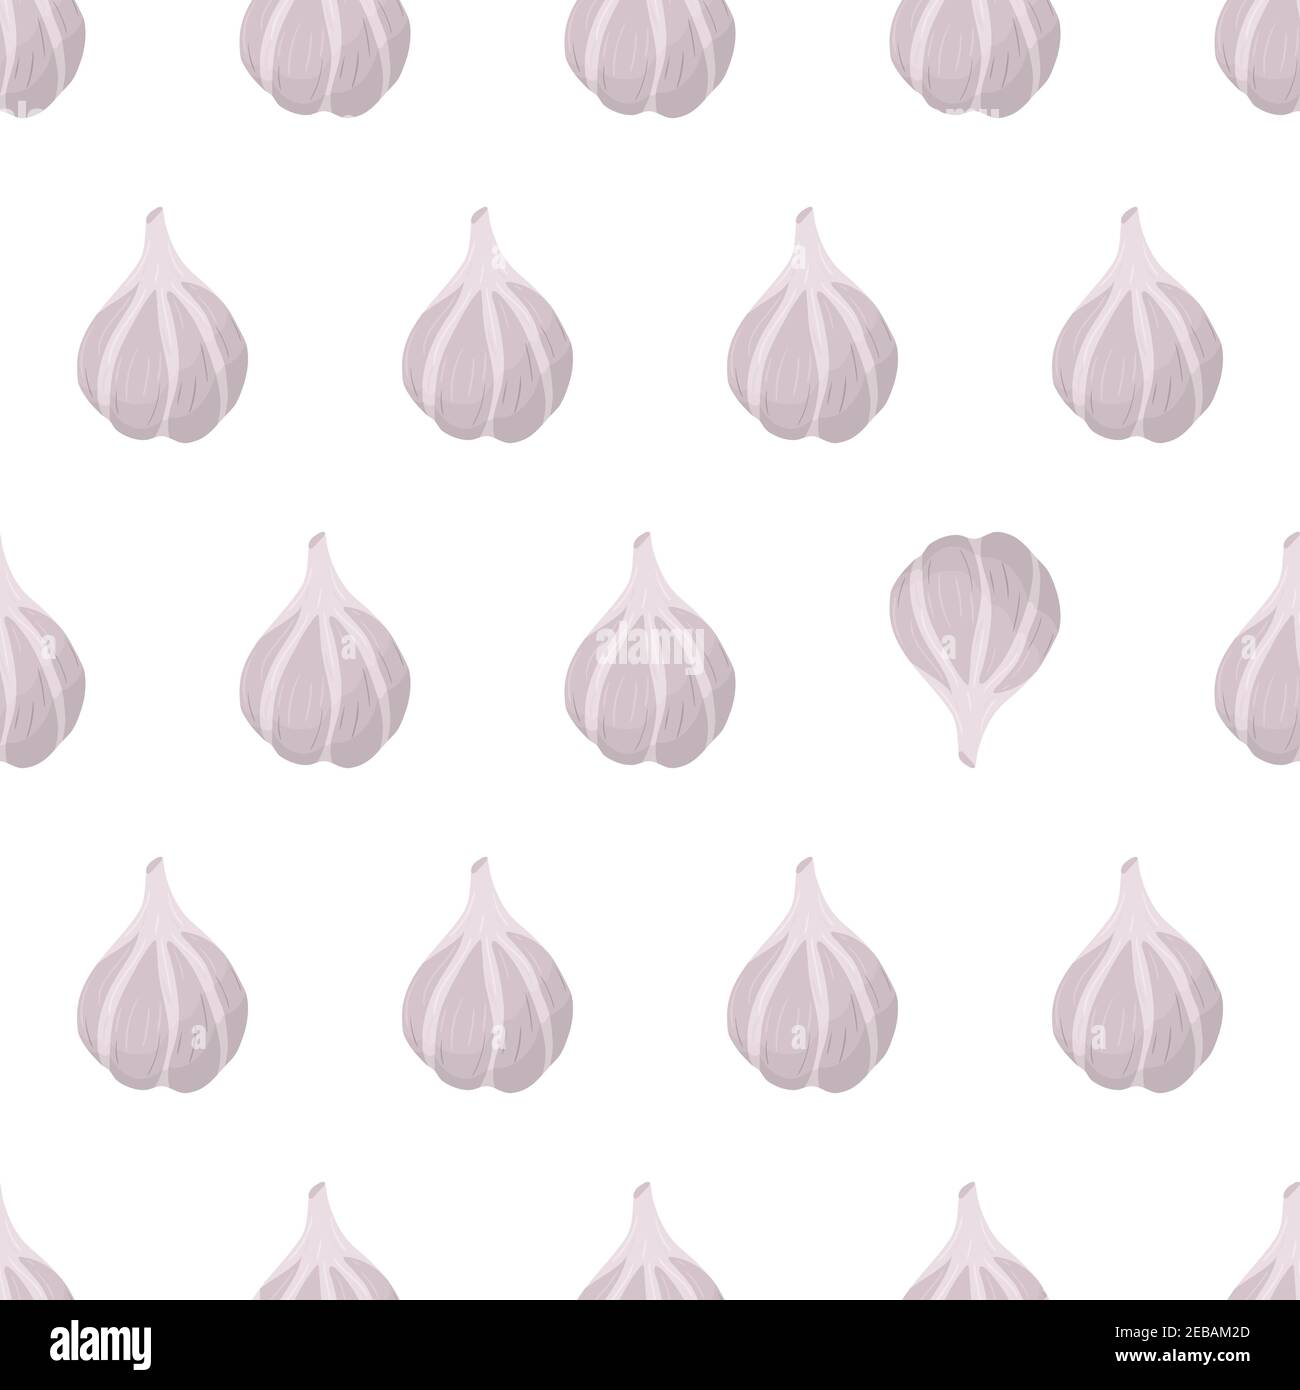 Garlic bulb seamless pattern in cartoon art style with eye catching element. Vector illustration graphic design. Healthy food background. Vegetable, spice for cooking. Stock Vector